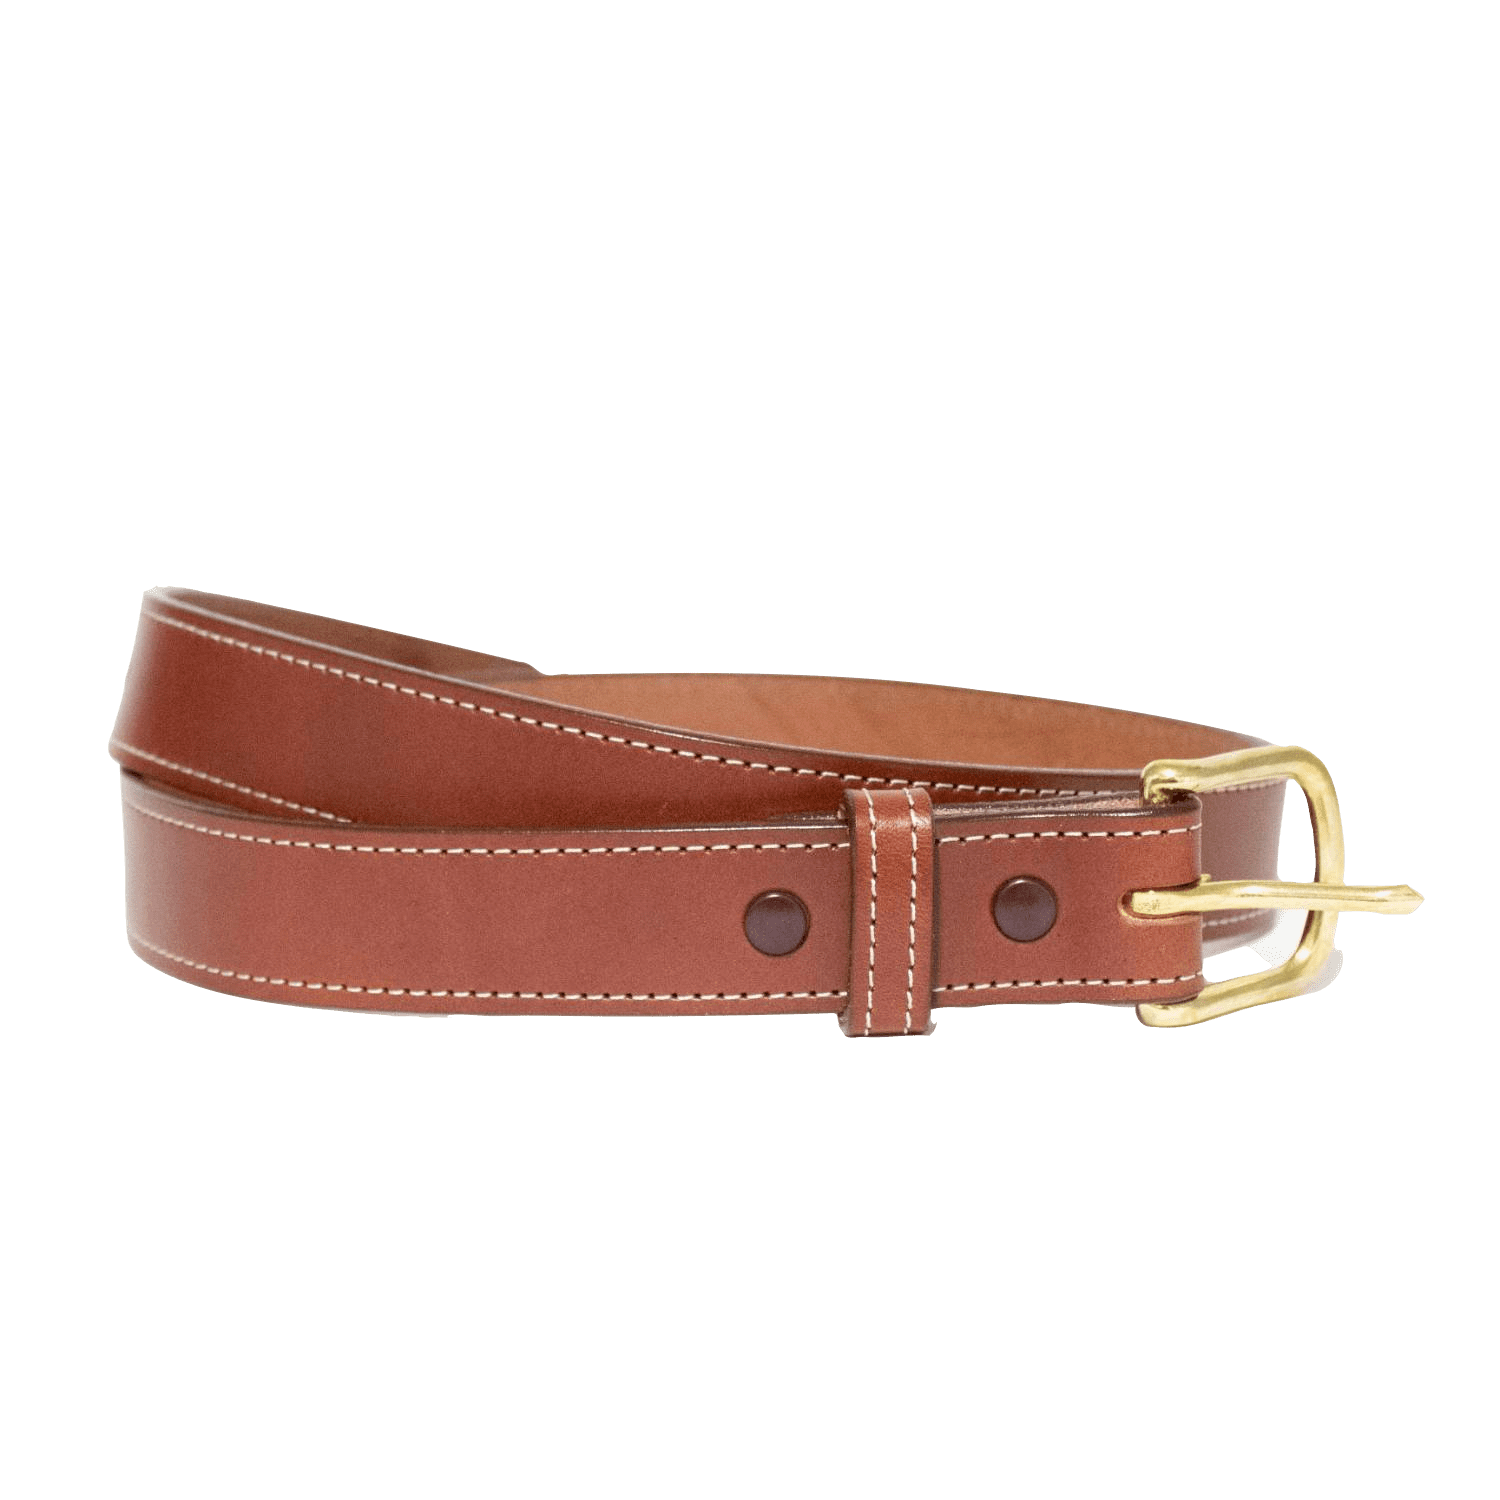 Handmade Amish Leather  Work  Belt for Men or Women  with Plain Buckle 